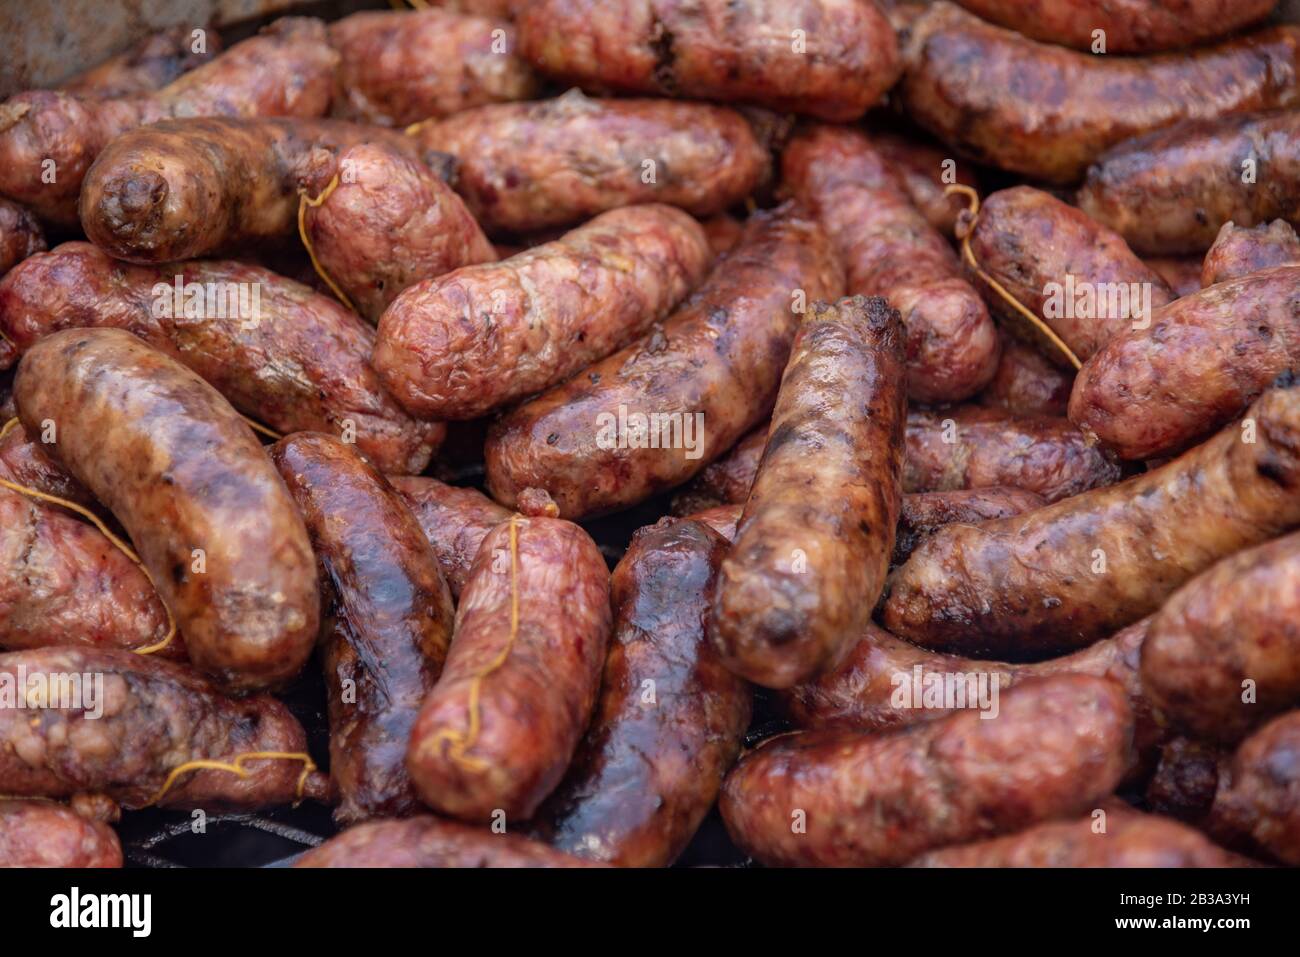 A grill full of coocked chorizos or sausages ready to eat a choripan Stock Photo